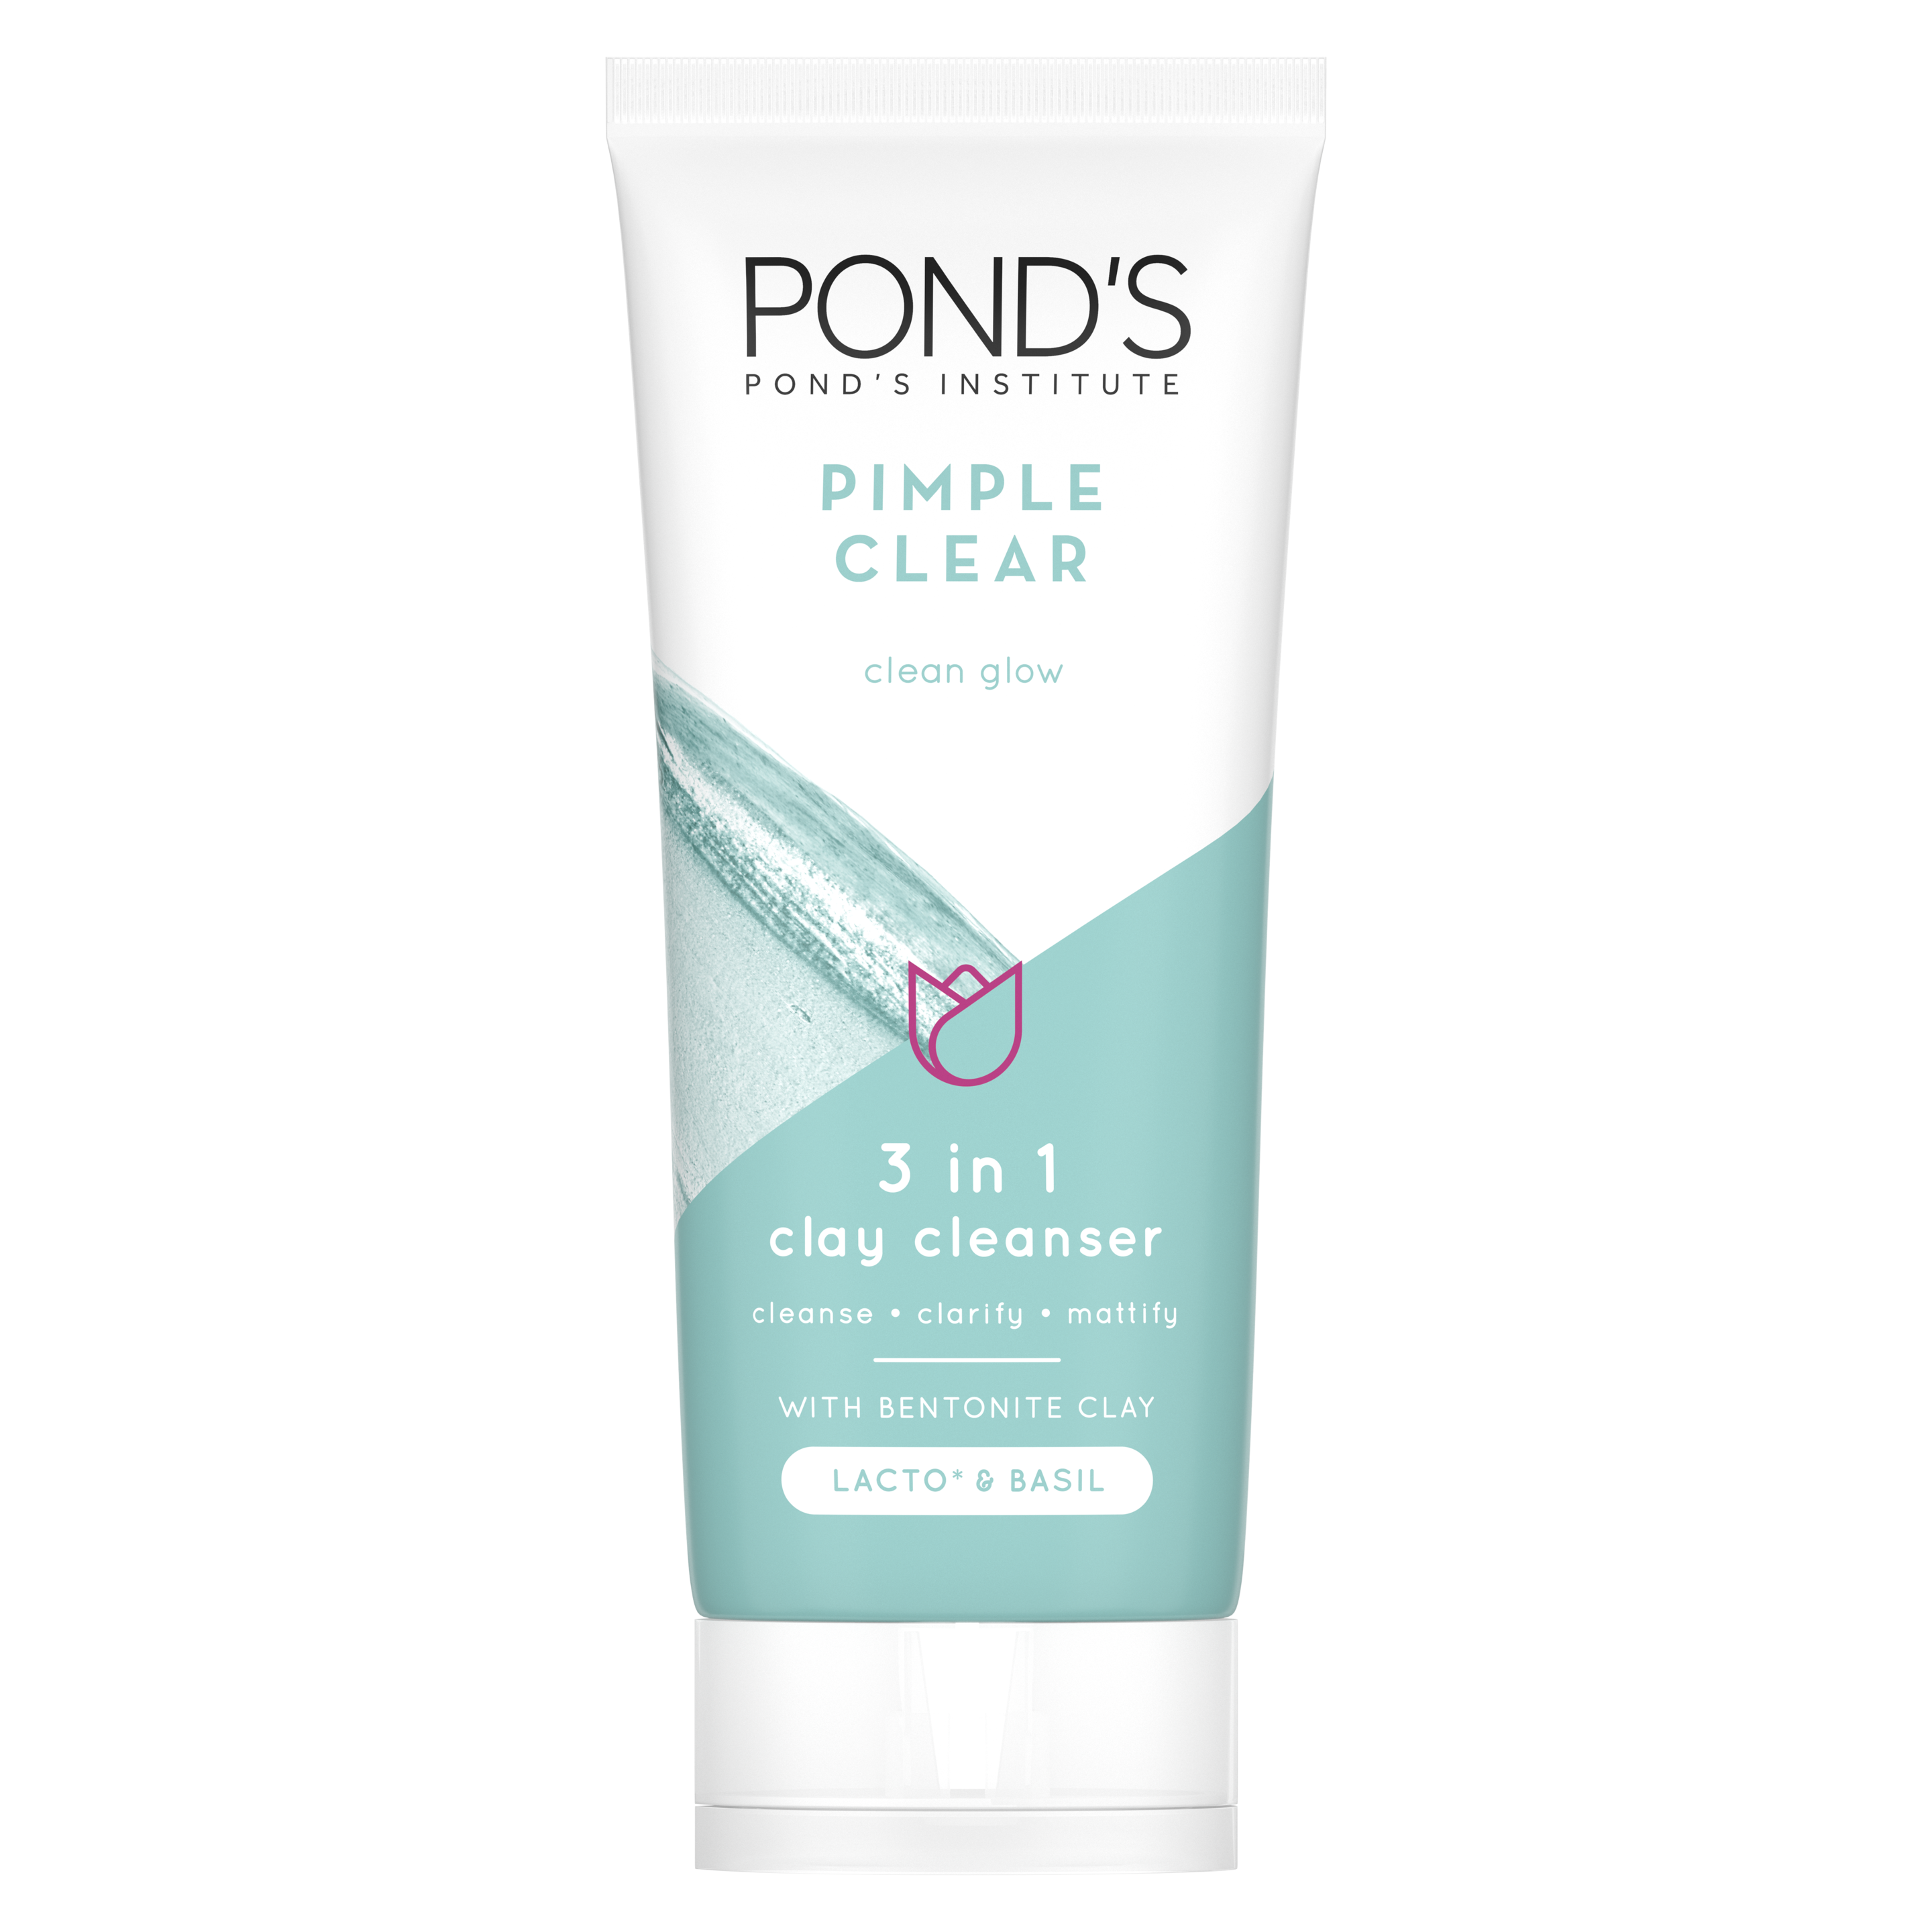 POND'S Pimple Clear Mineral Clay Cleanser